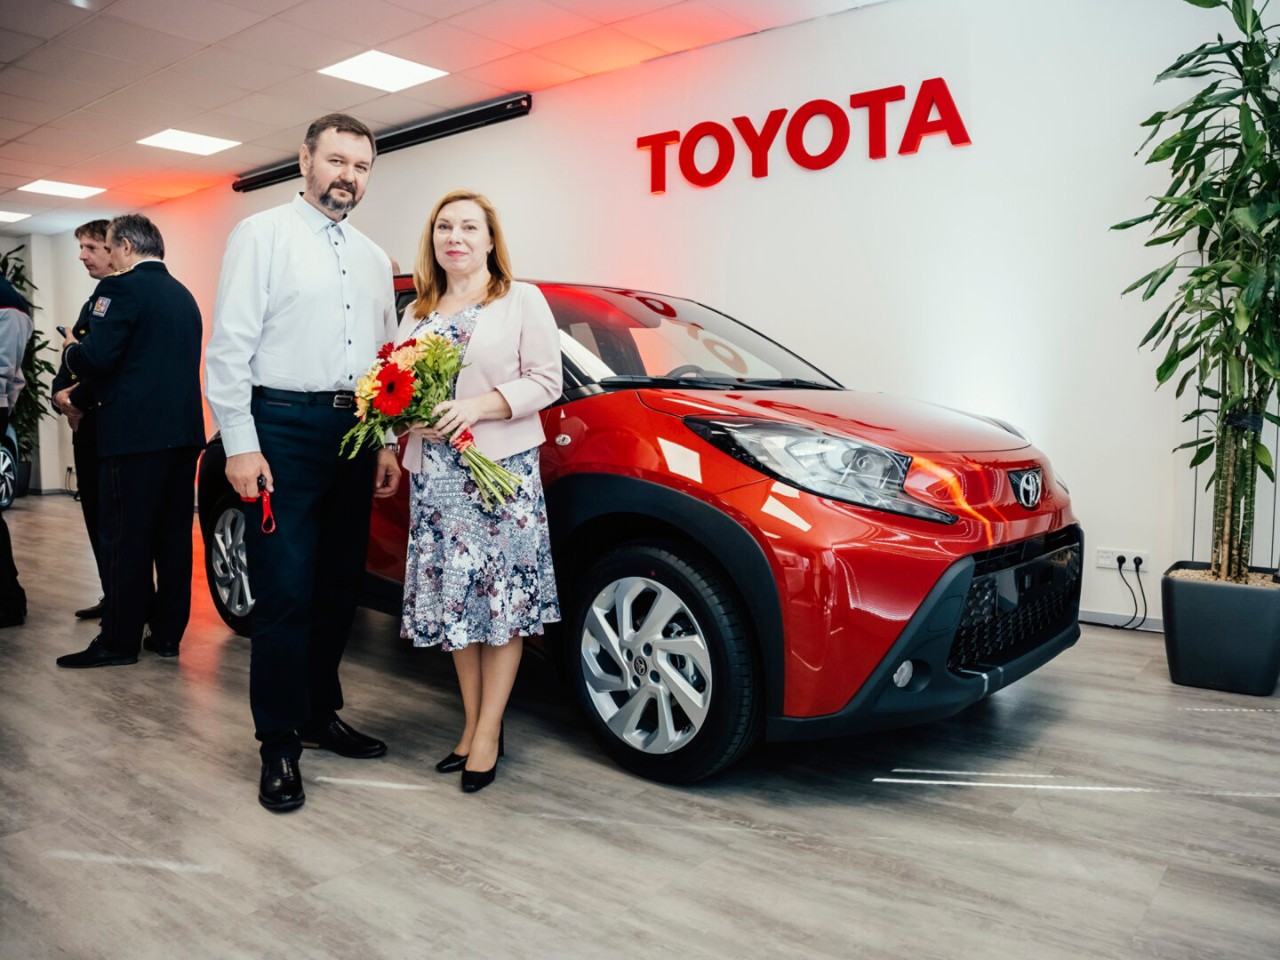 Czech couple are the first customers to receive the new Aygo X